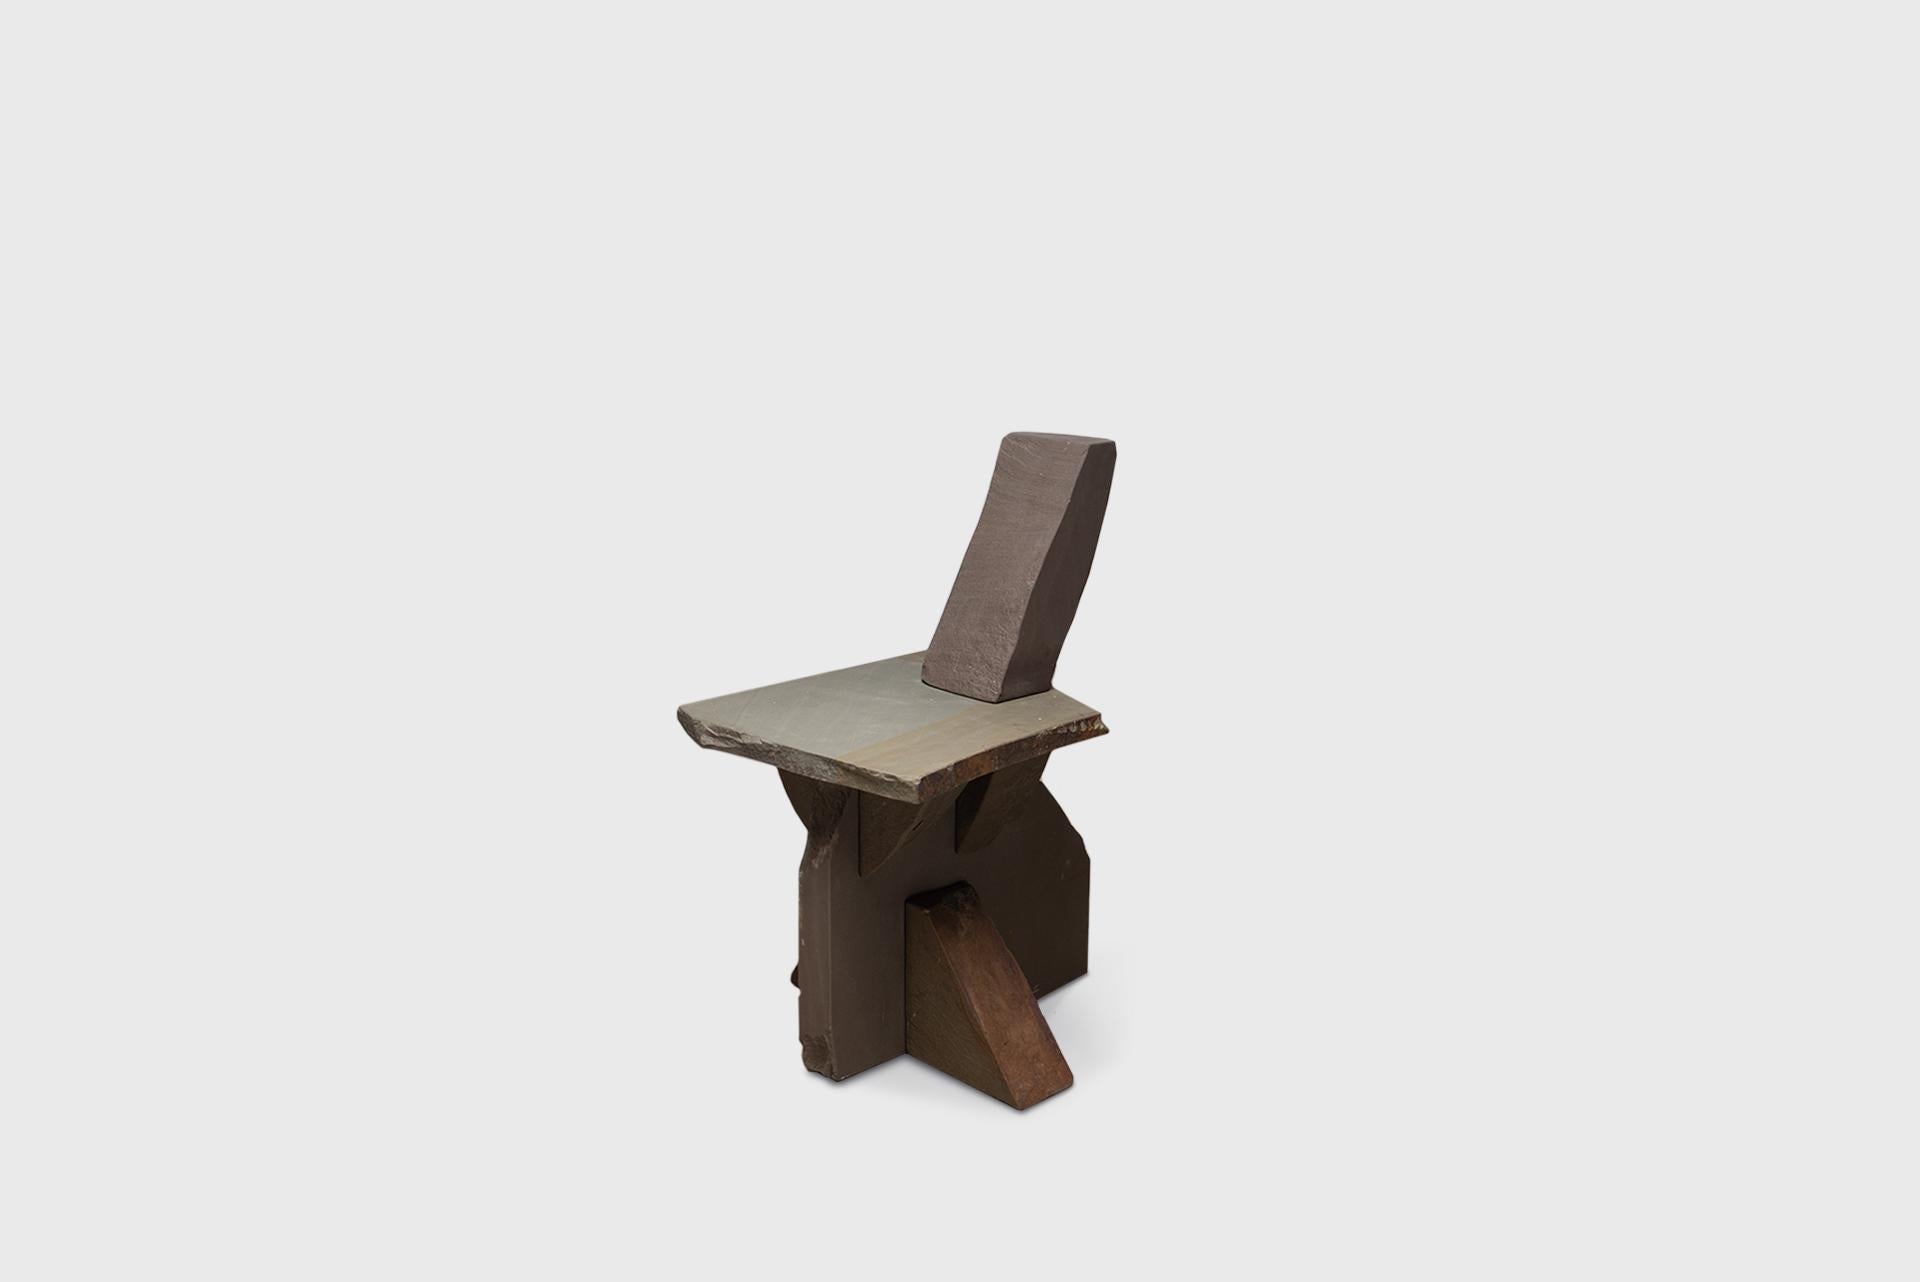 Contemporary Natural Chair 18, Graywacke Offcut Gray Stone, Carsten in der Elst For Sale 3